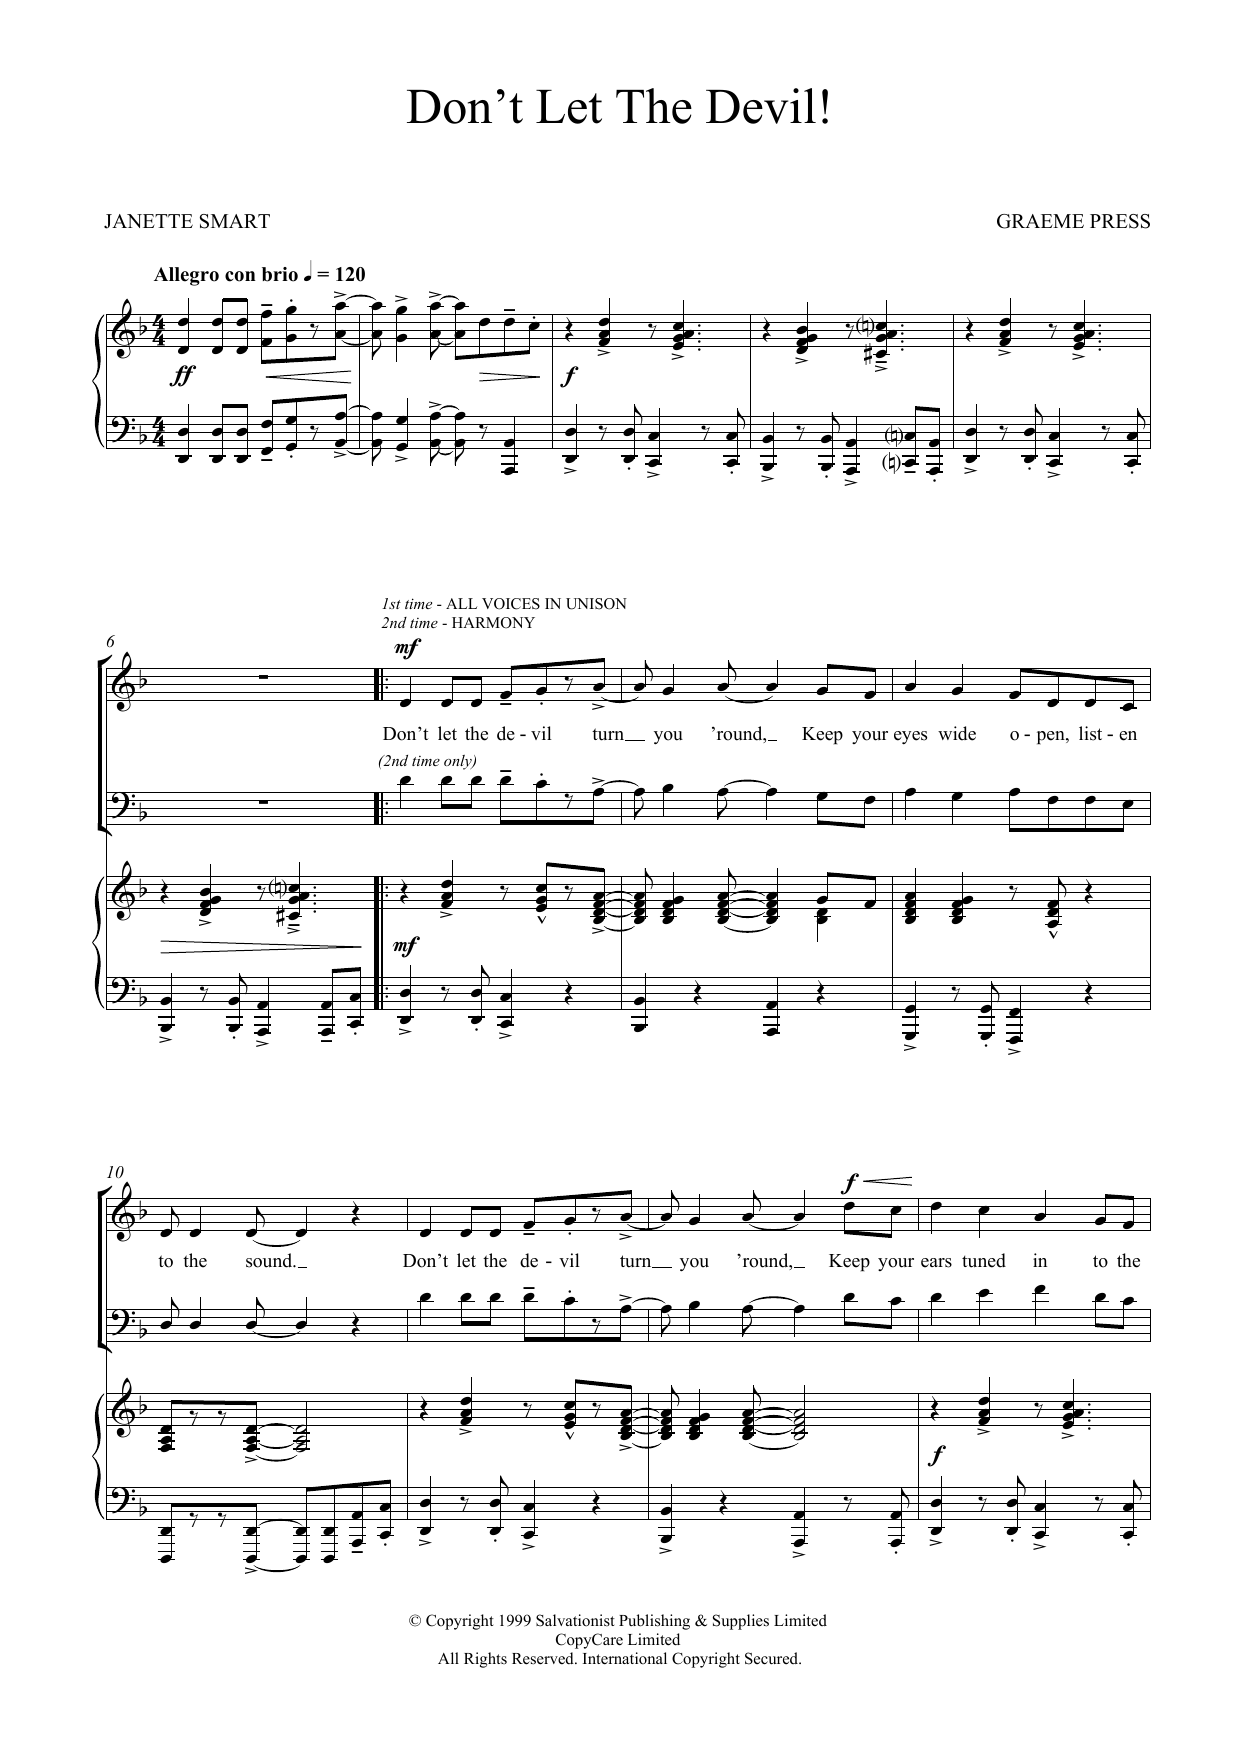 Download The Salvation Army Don't Let The Devil Sheet Music